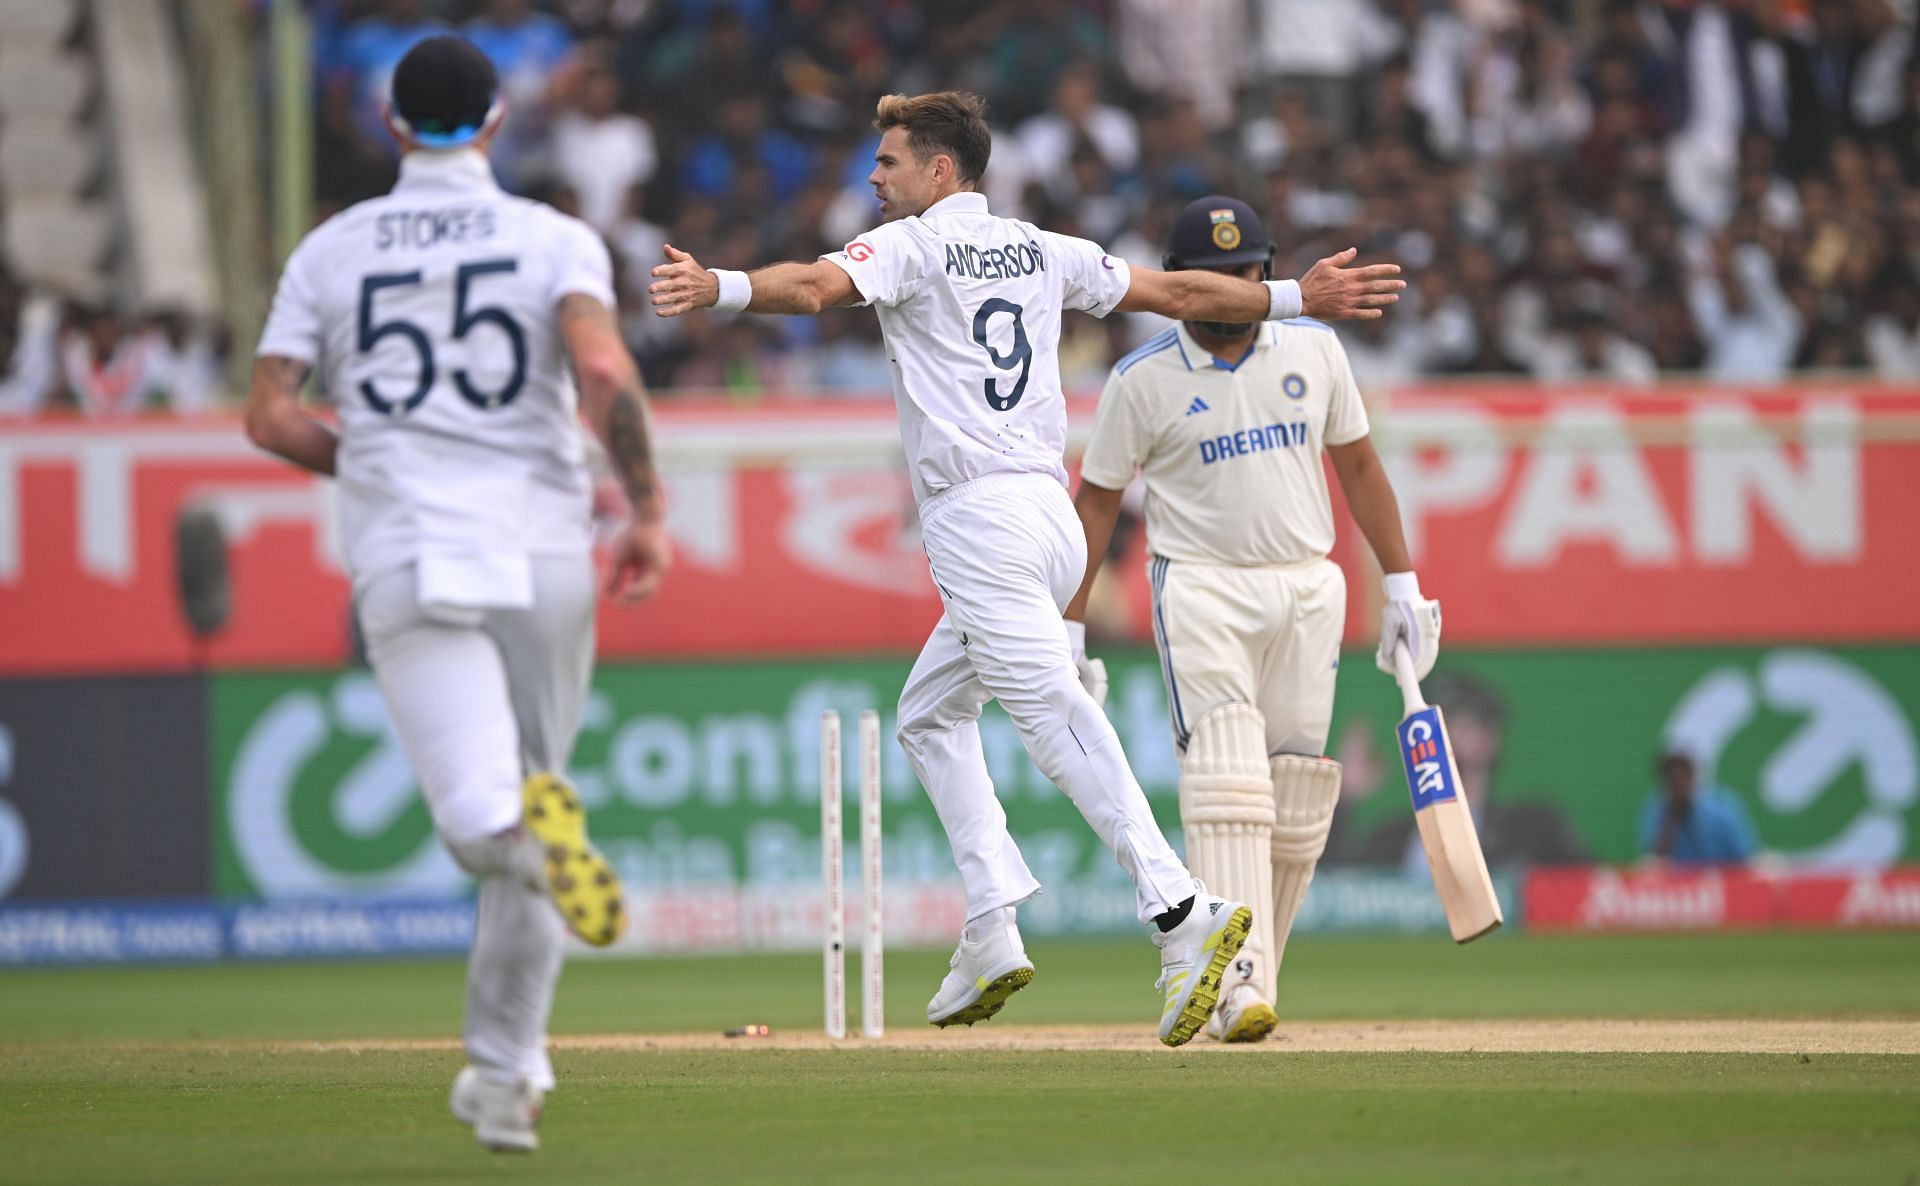 James Anderson castled Rohit Sharma with a peach of a delivery. [P/C: Getty]